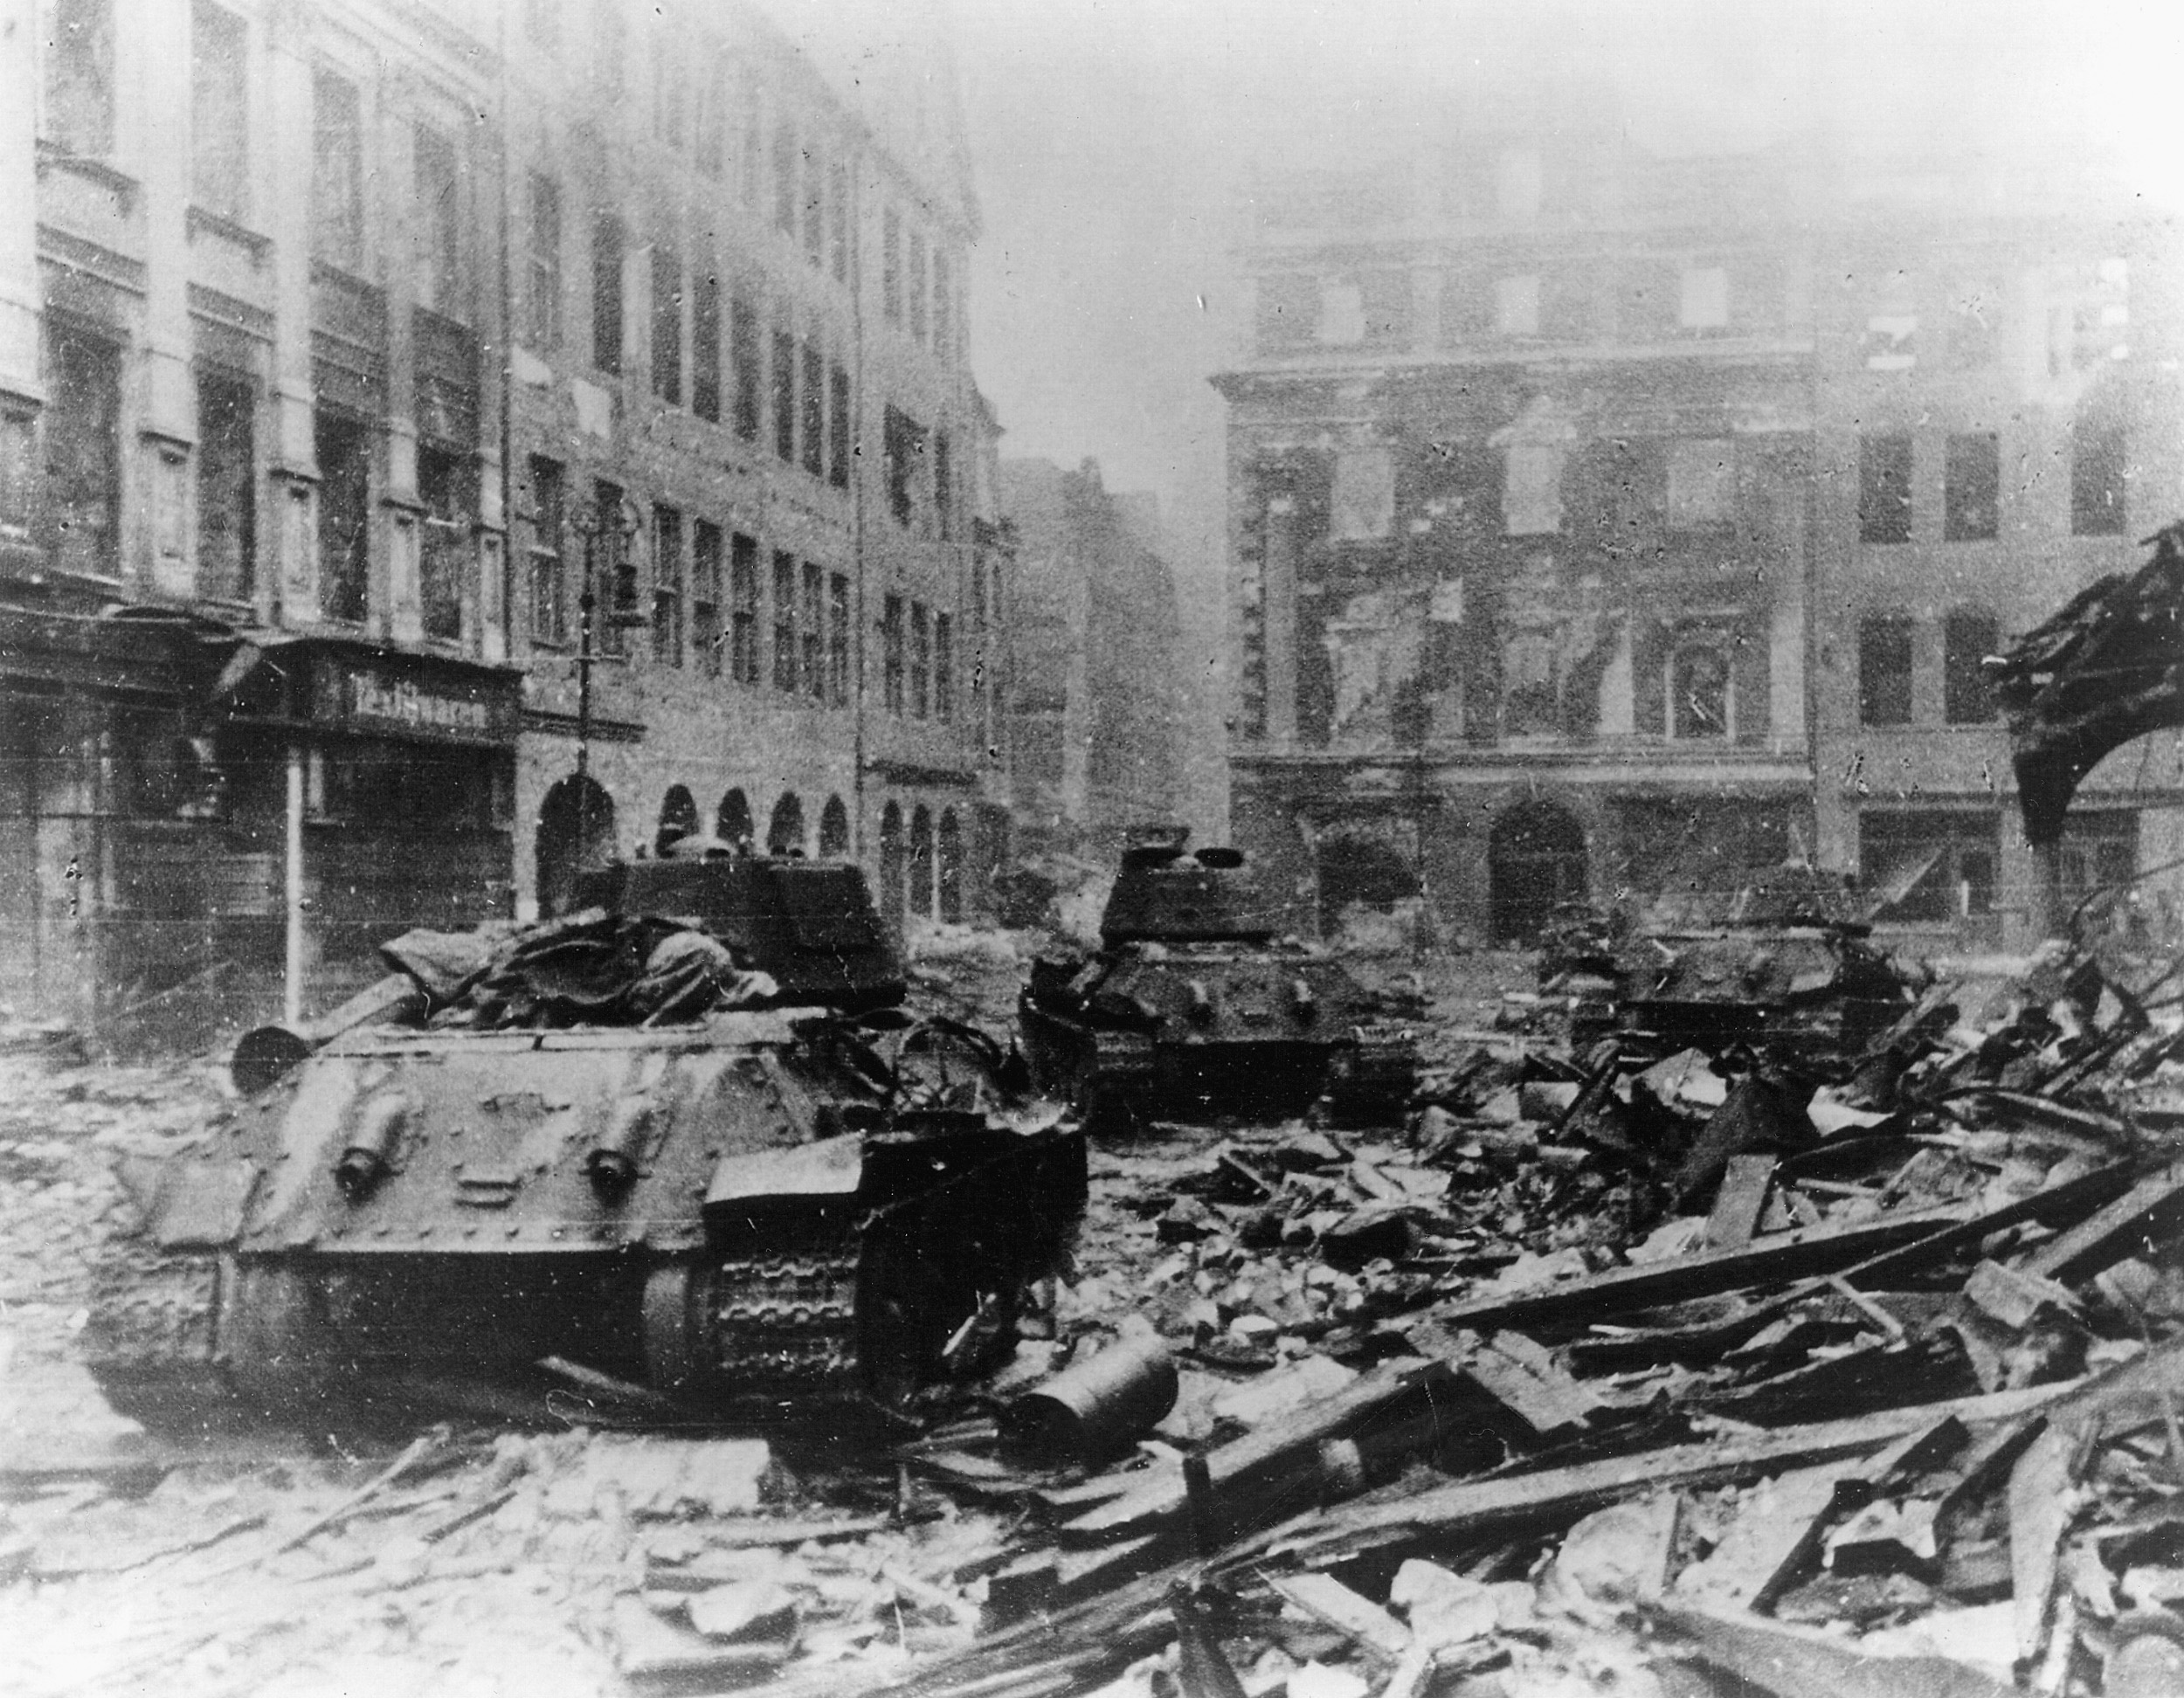 Soviet T-34 tanks rumble through the rubble-strewn streets of Berlin in May 1945.